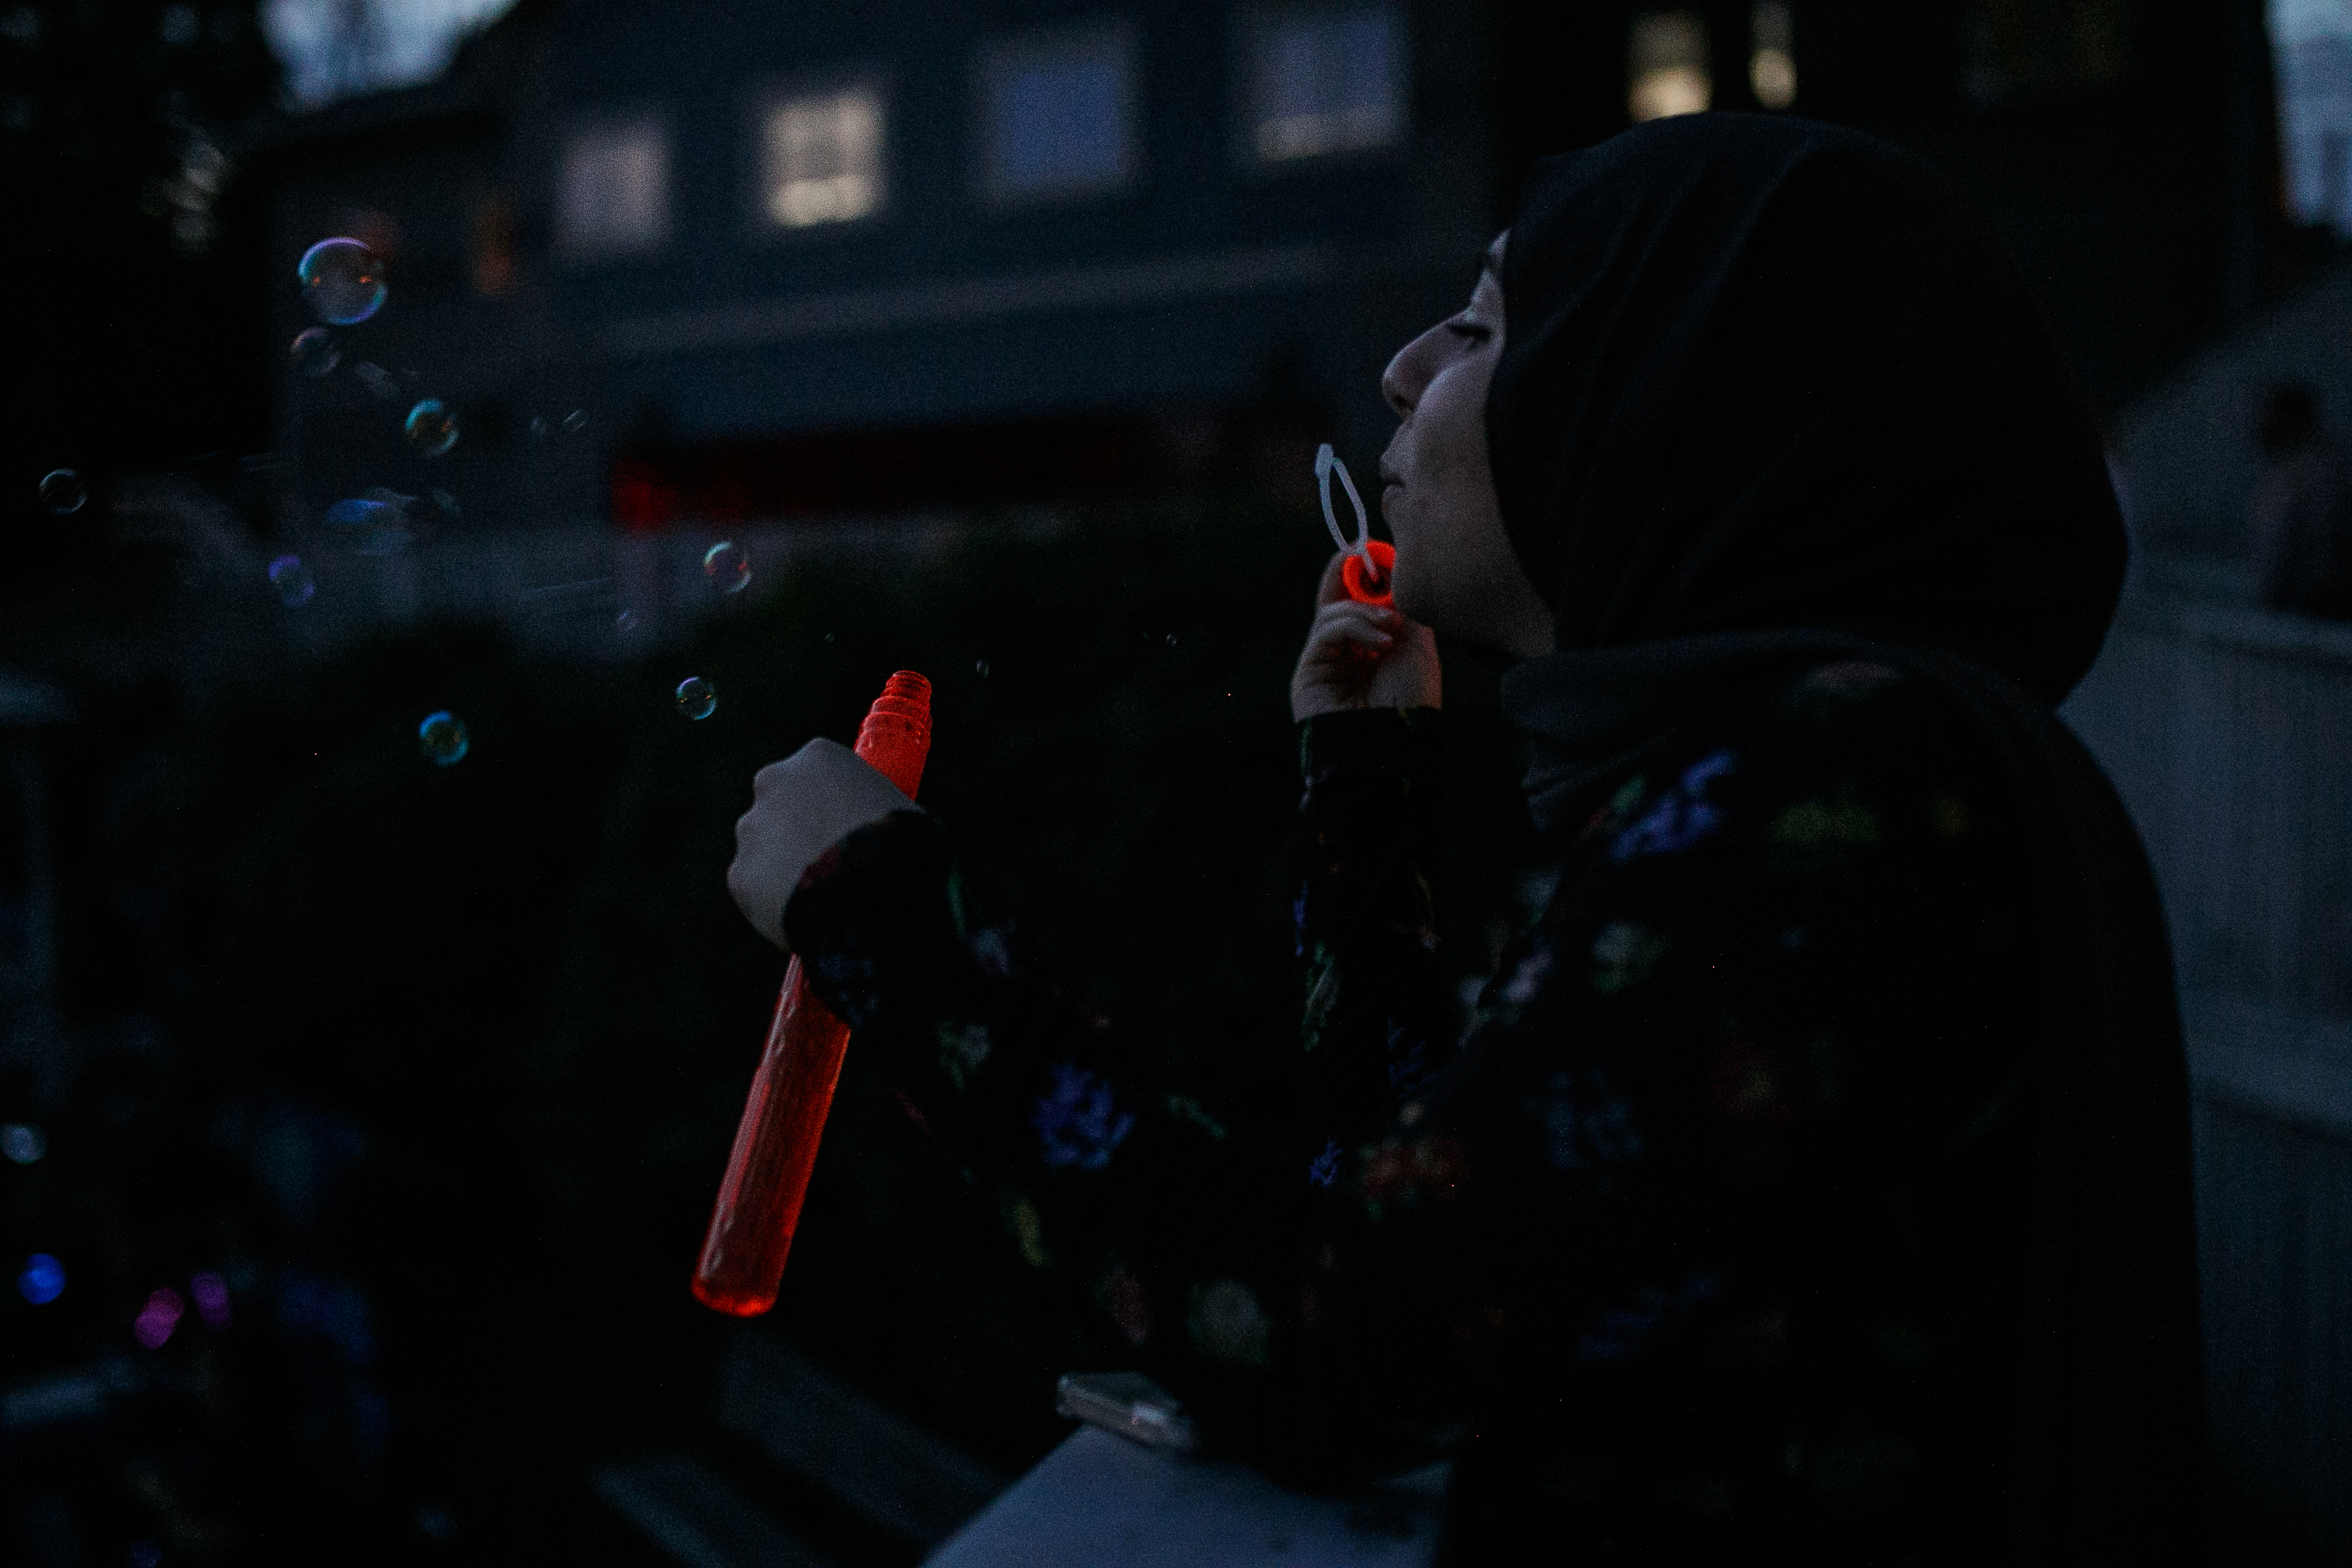 Saafa Tahboub blows bubbles while waiting for the start of the annual Lake Fenton Fireworks on the water in front of the Township hall on Saturday, June 2, 2022 in Fenton Township. (Jenifer Veloso | MLive.com)

